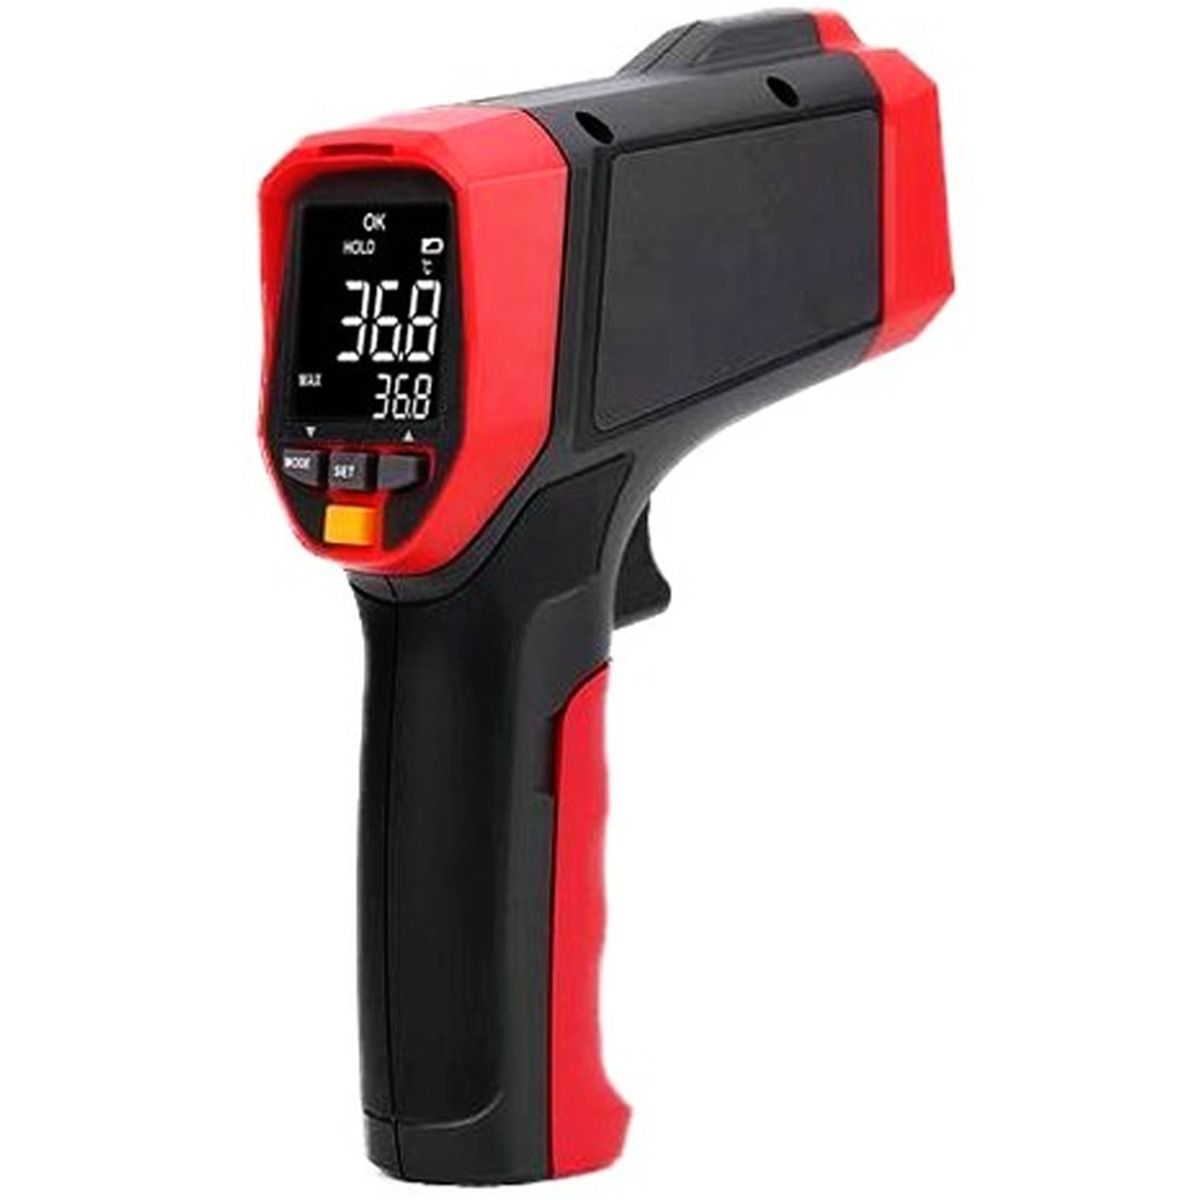 Global Digital Infrared Thermometer (UNI-T UT 308H), Pack of 1 